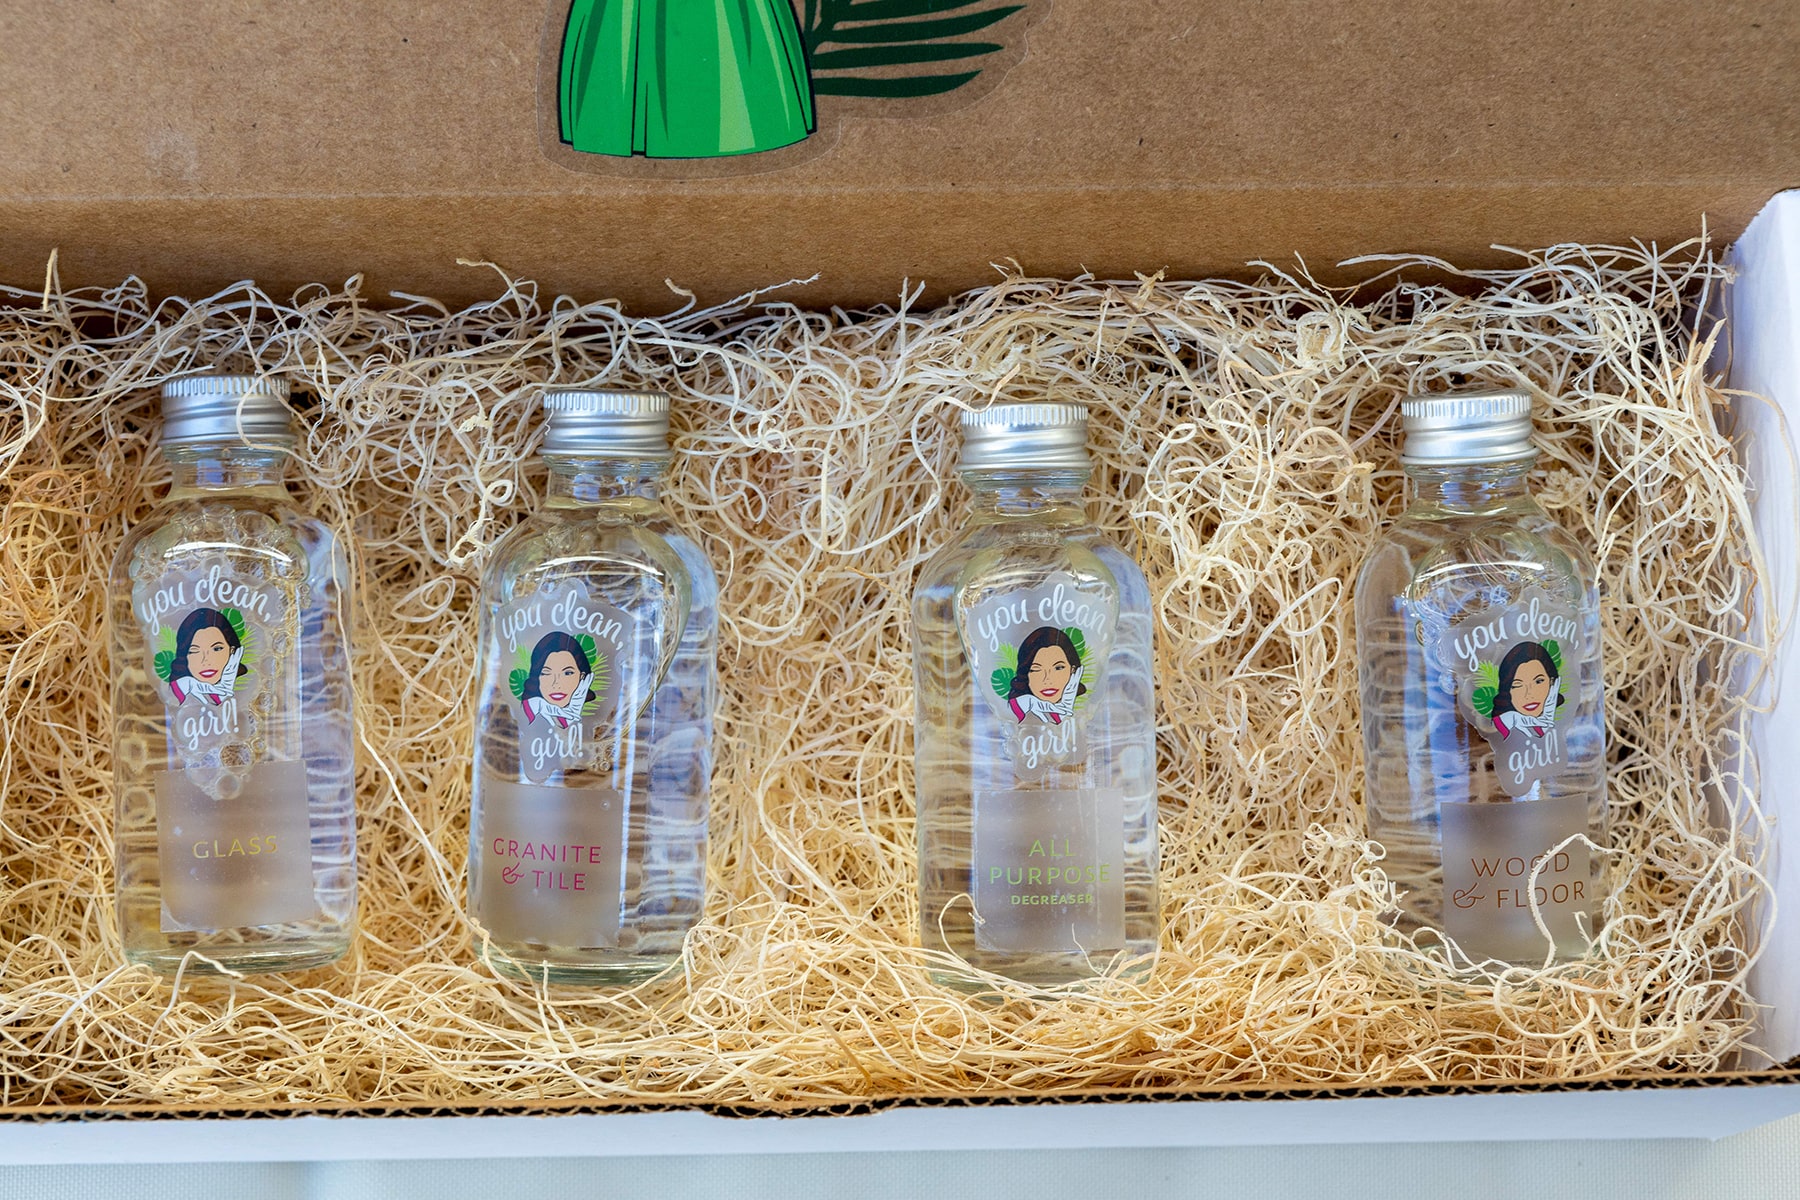 Four glass bottles lying on a heap of hay inside a box